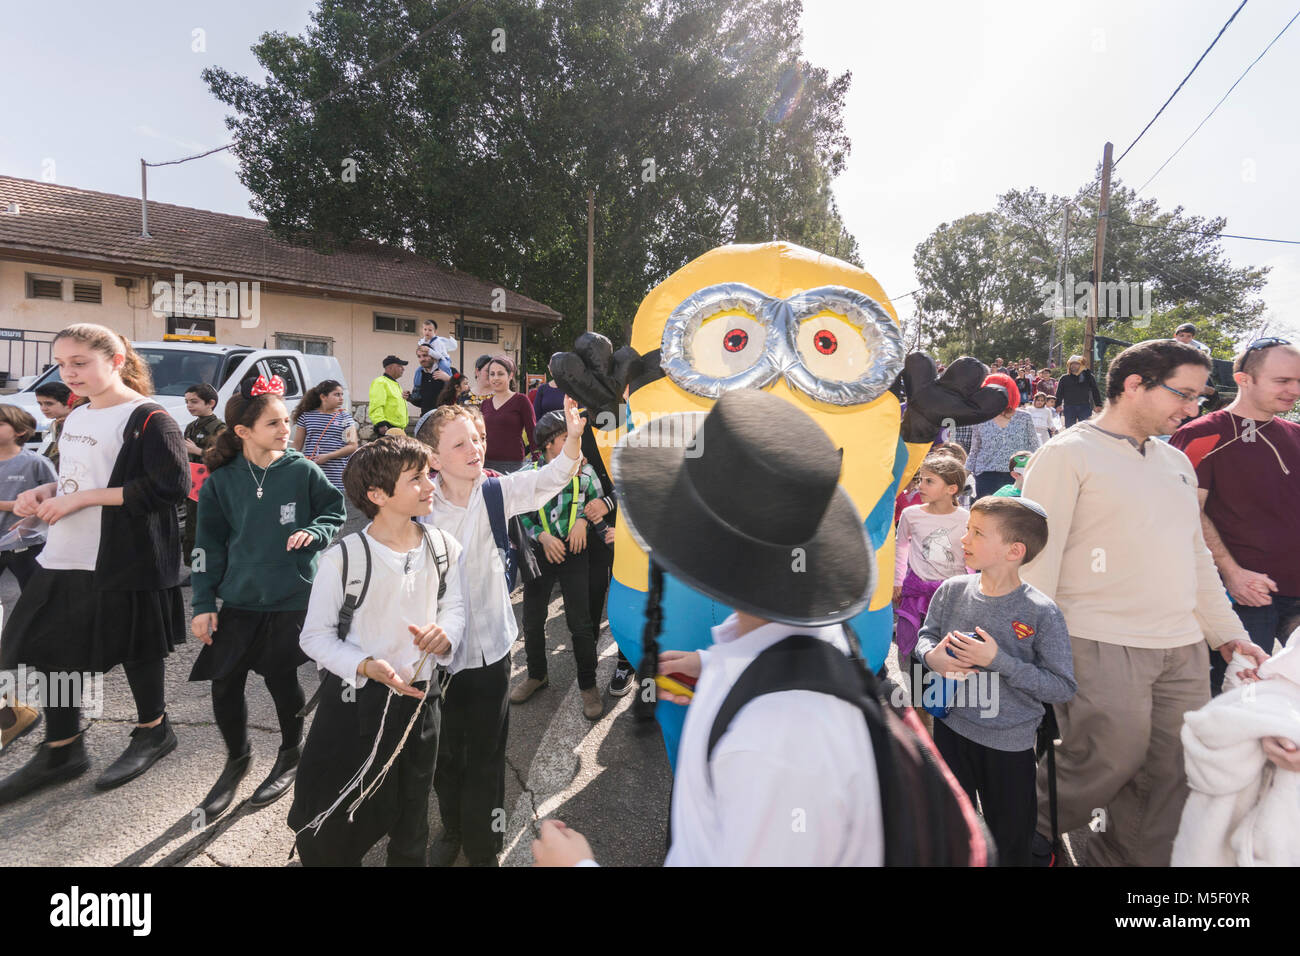 Elkana, Israel. 23rd February, 2018. Kids and parents walk near a Minion customed man, in a parade celebrating the upcoming Jewish holiday of Purim. On this holiday, marking an ancient tradition about Jews being saved from destruction, many people and virtually all kids wear Costumes. Credit: Yagil Henkin/Alamy Live News Stock Photo